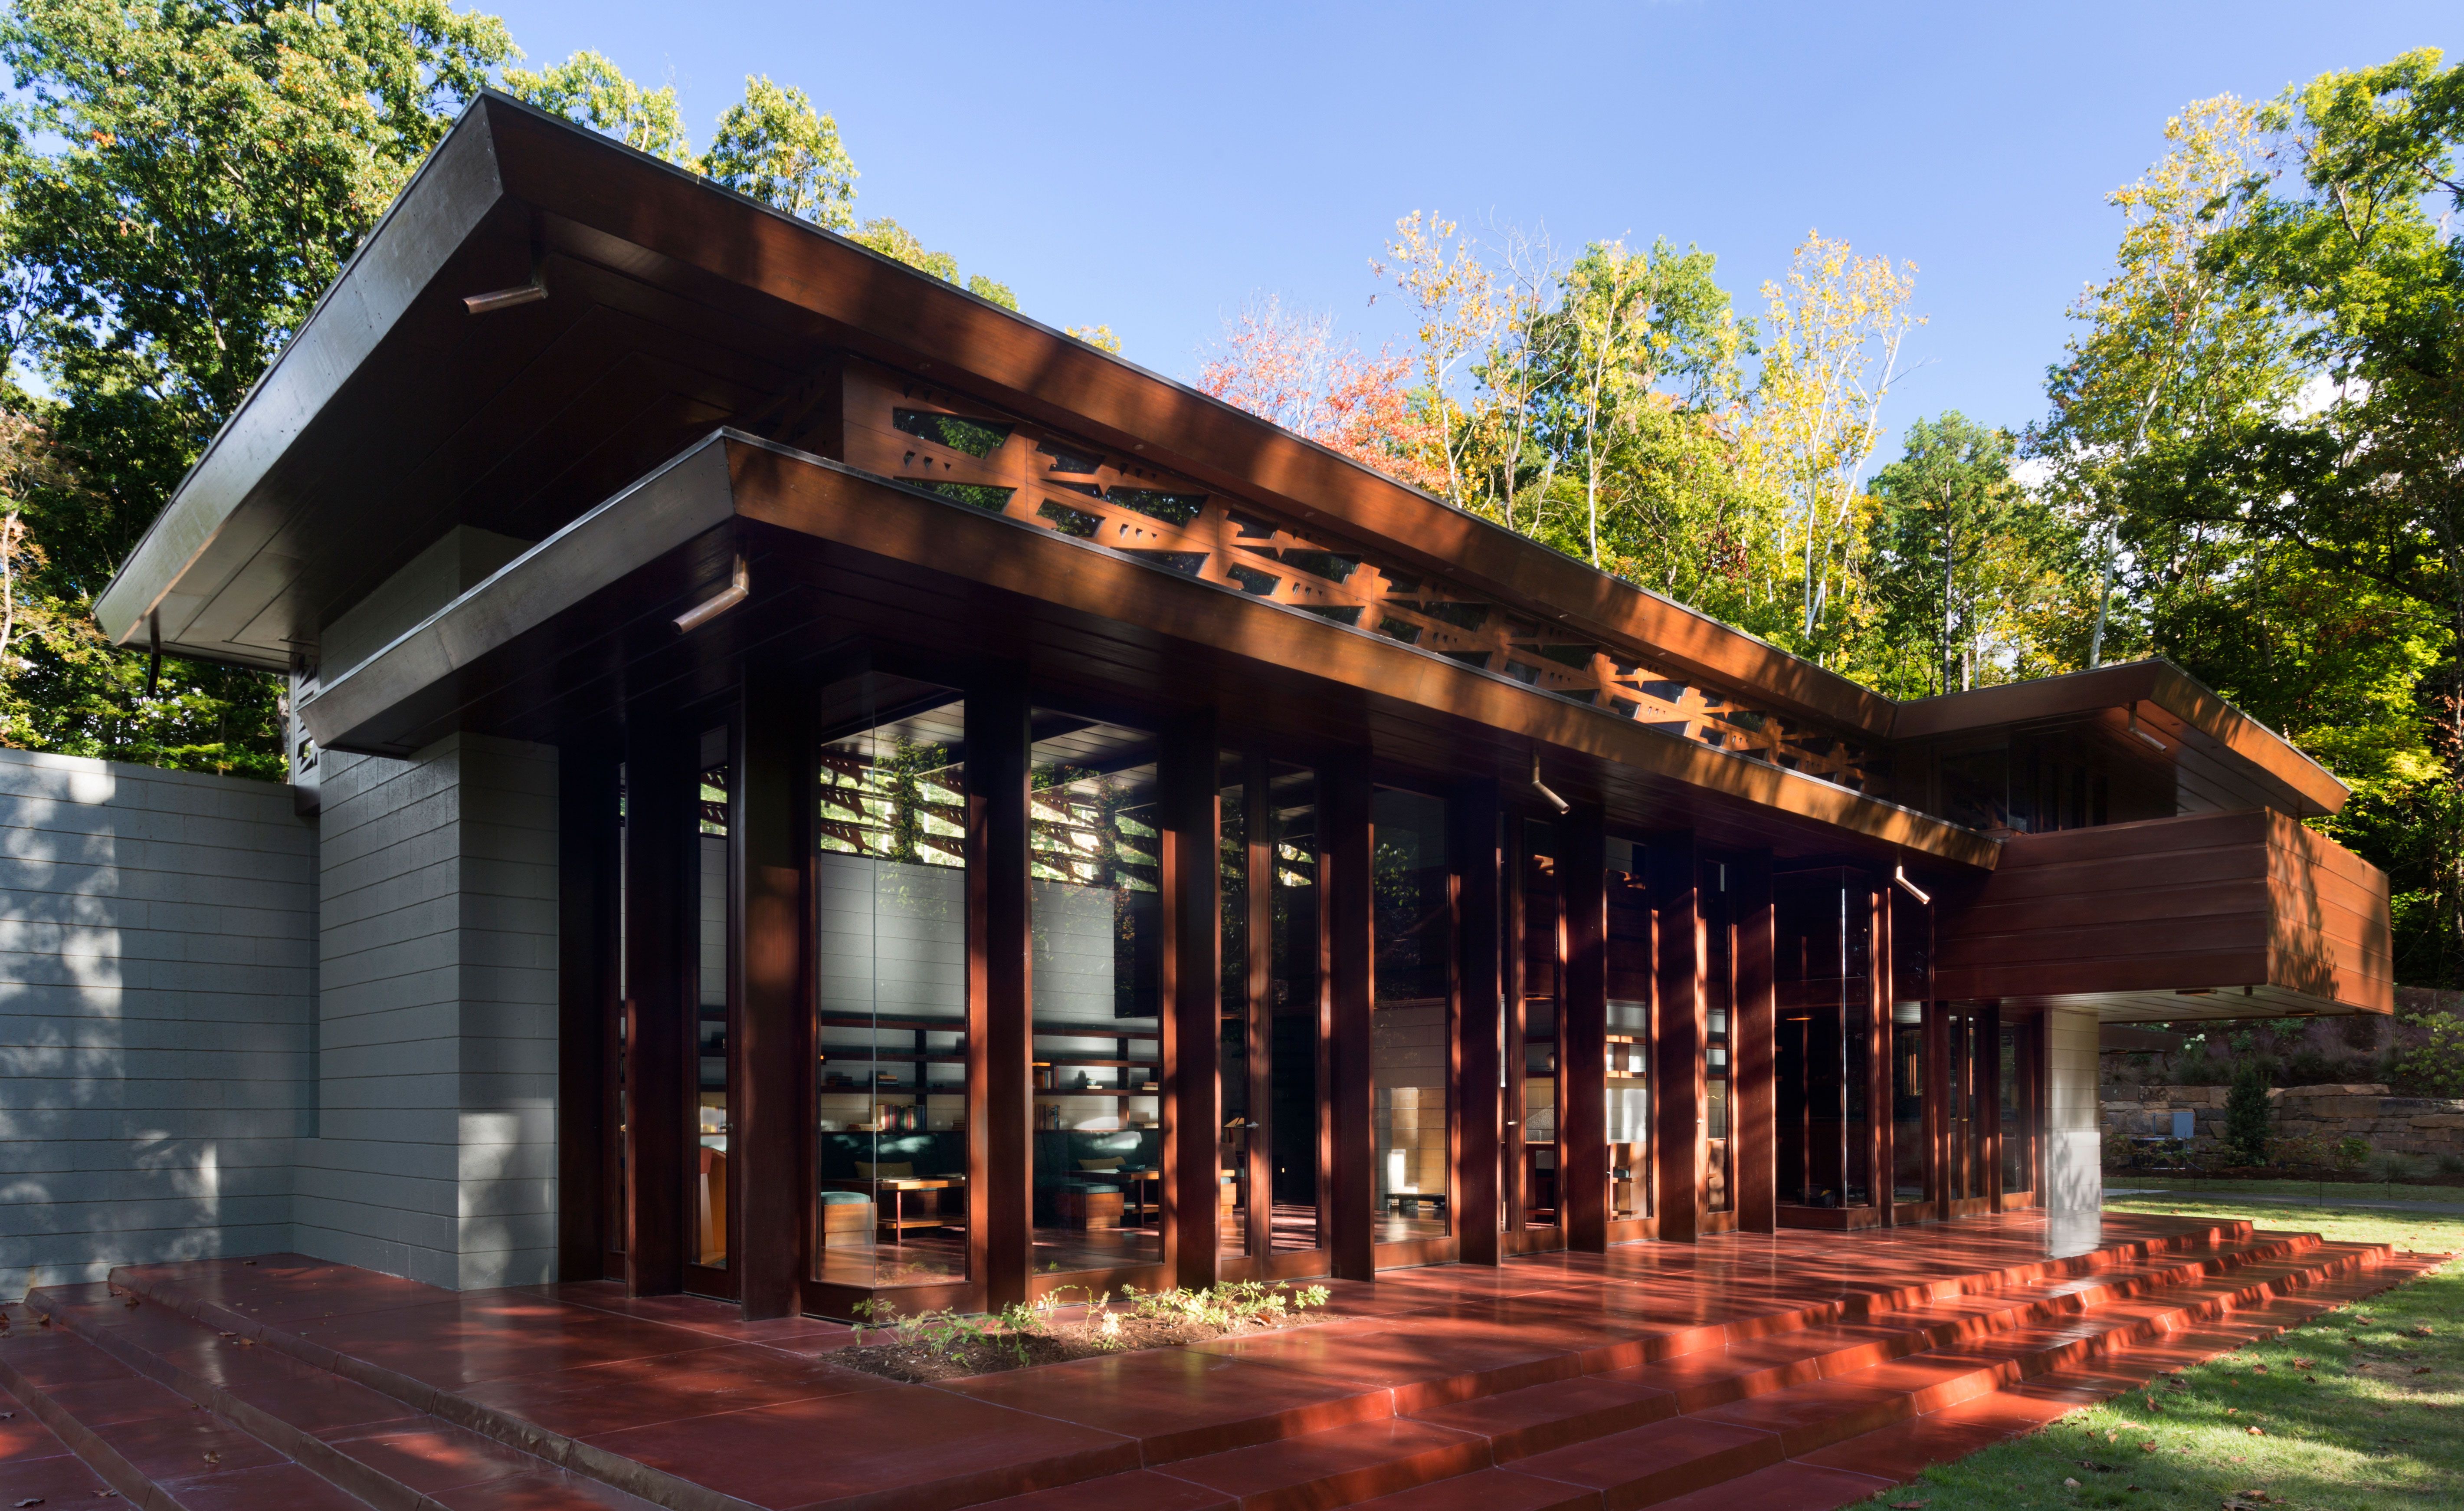 Frank Lloyd Wright's Bachman Wilson House Gets A New Lease Of Life At Crystal Bridges. Wallpaper*